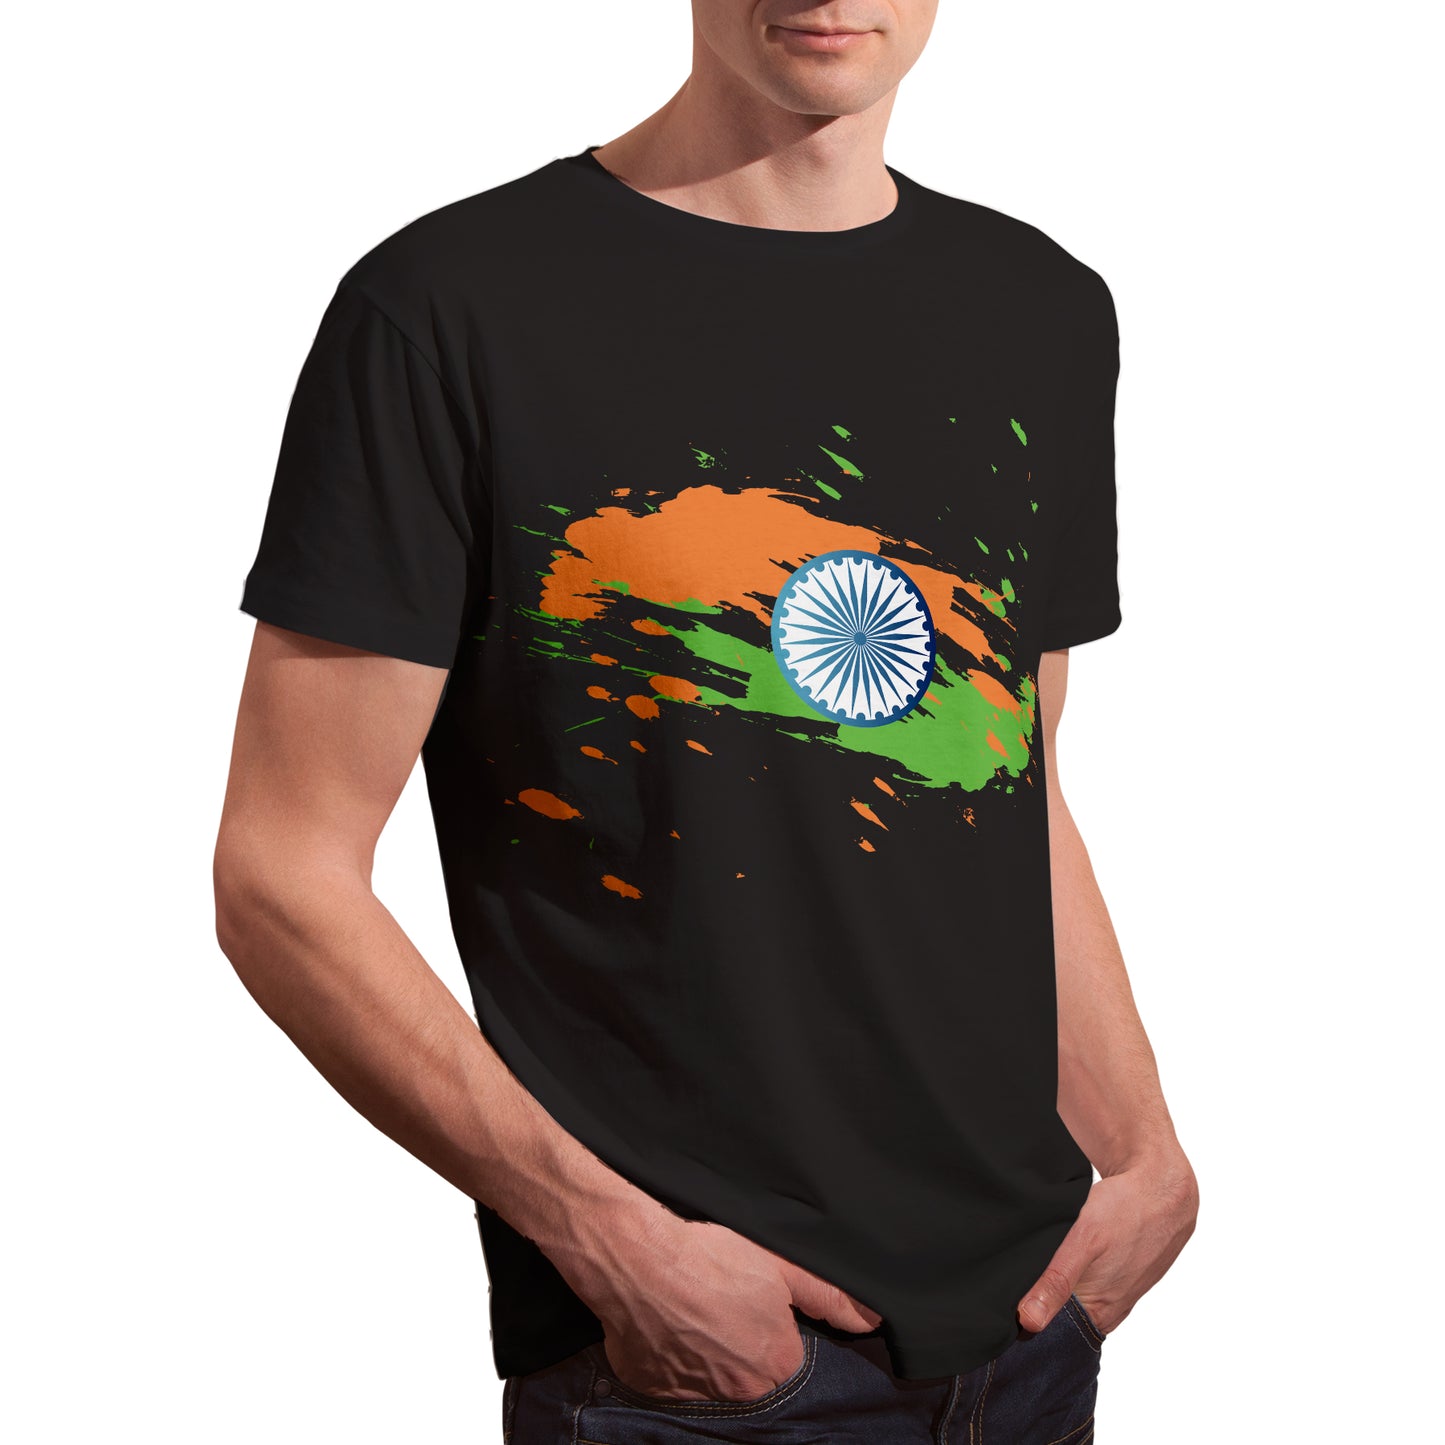 iberry's Independence day t shirt | Republic day t shirts |India t shirts |Patriotic tshirt |15 August t shirts |Round neck cotton tshirts -08